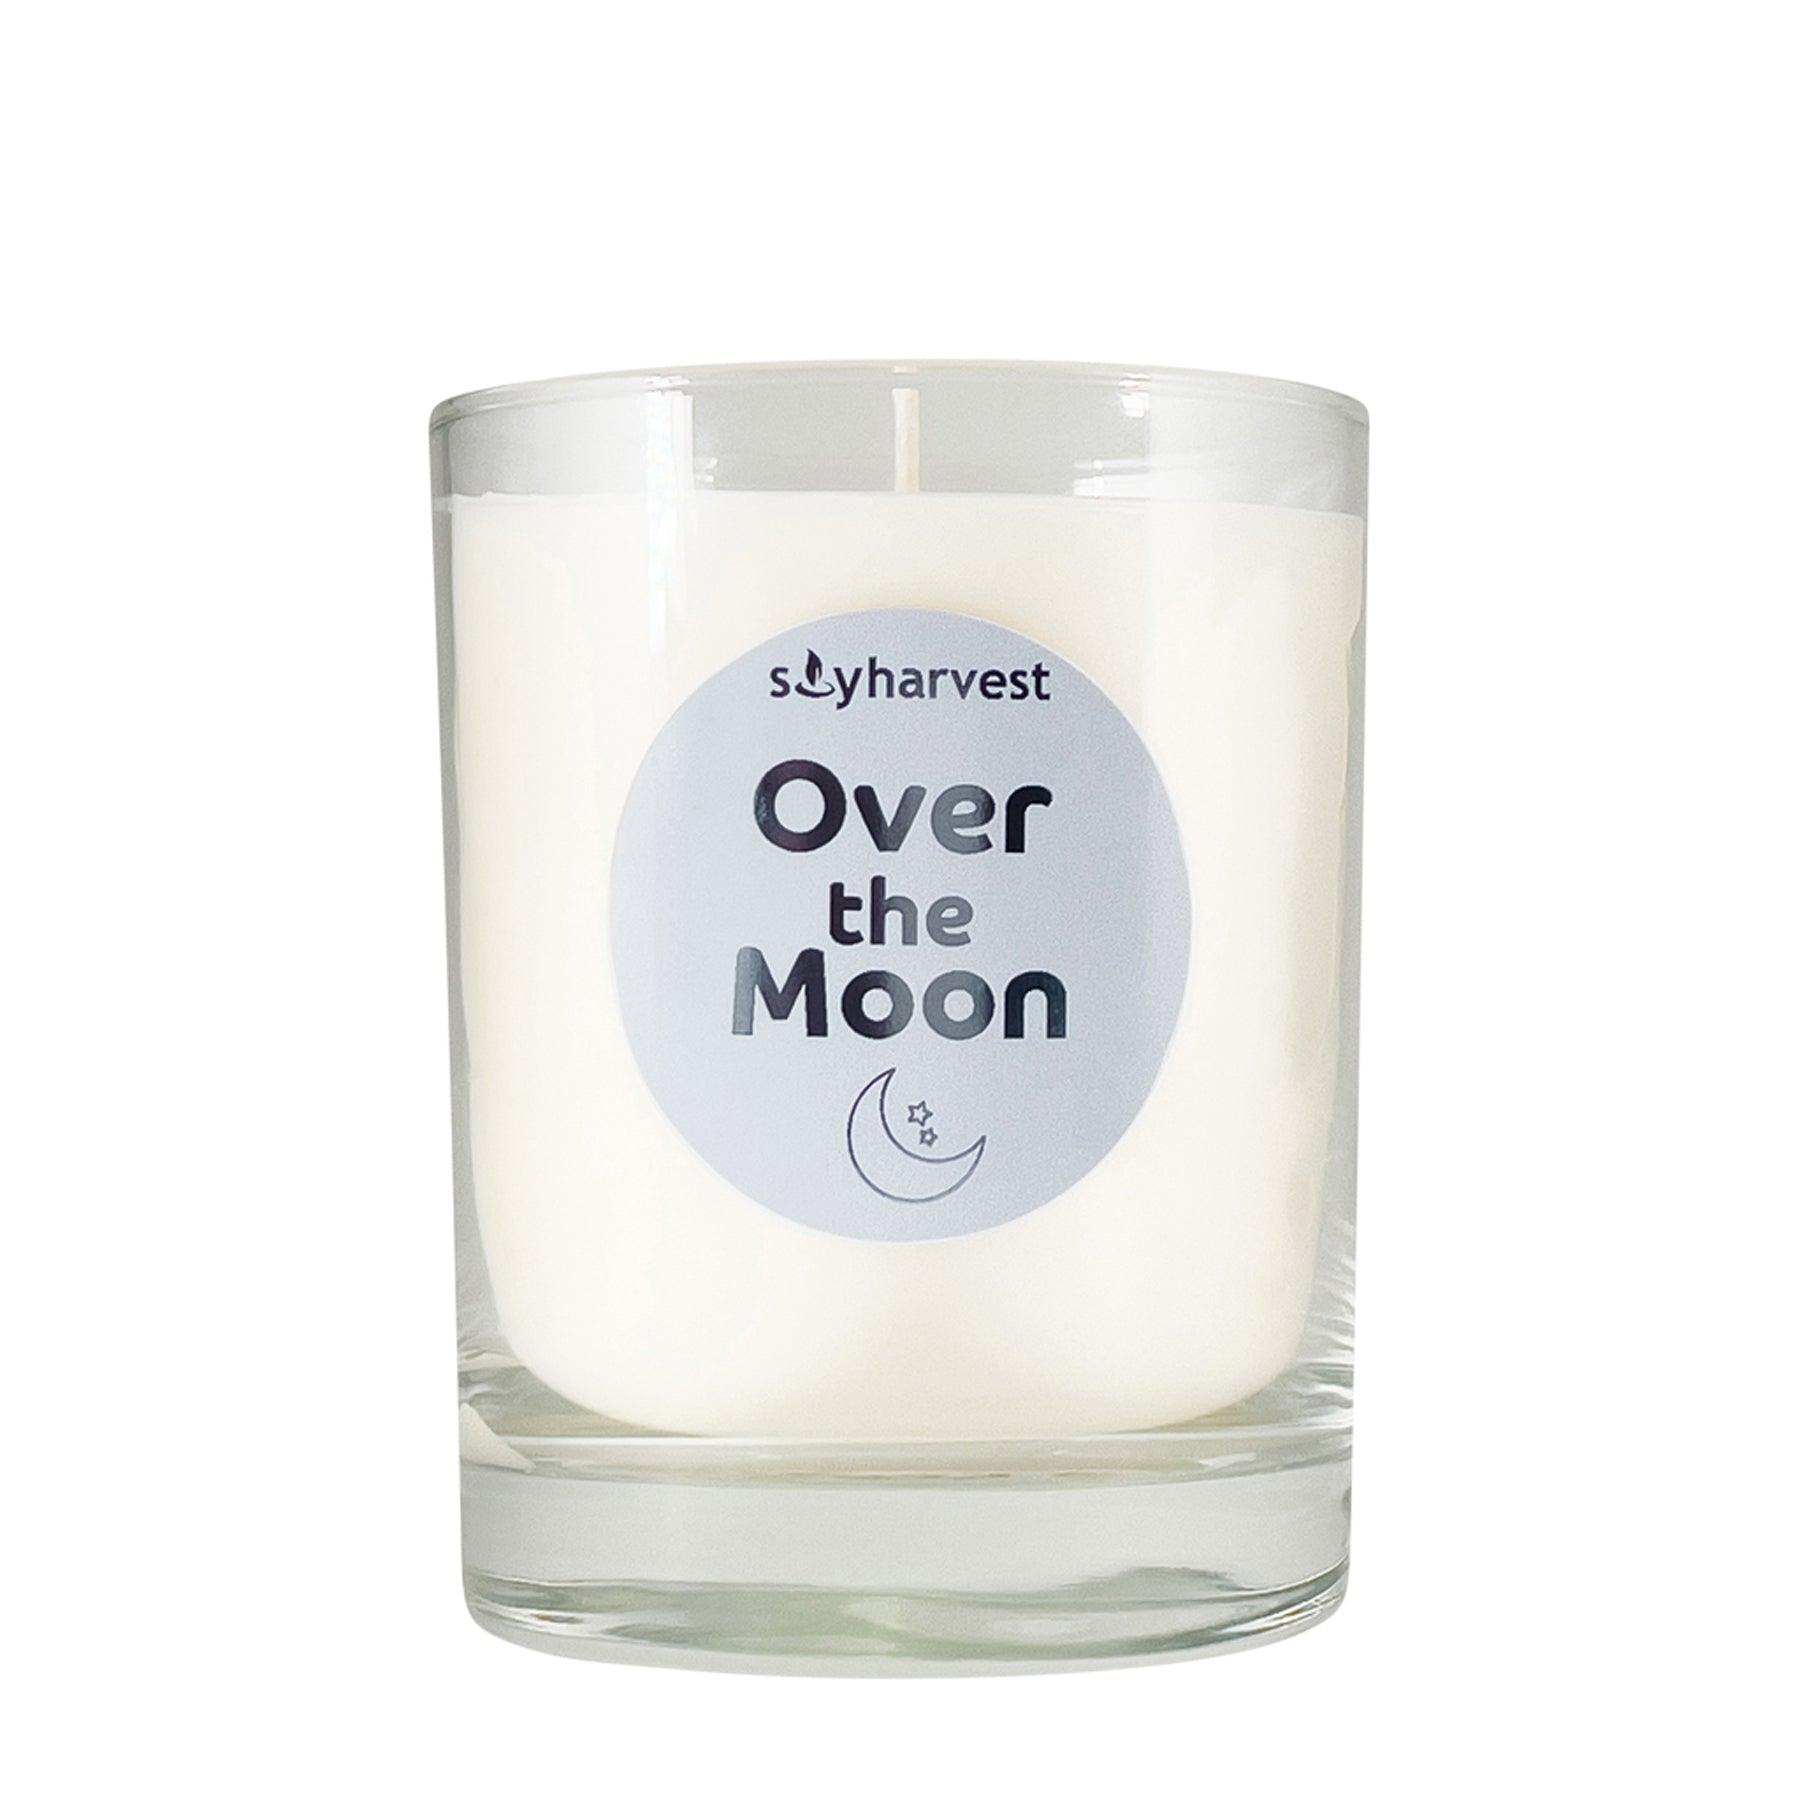 Over The Moon Soy Harvest Candle